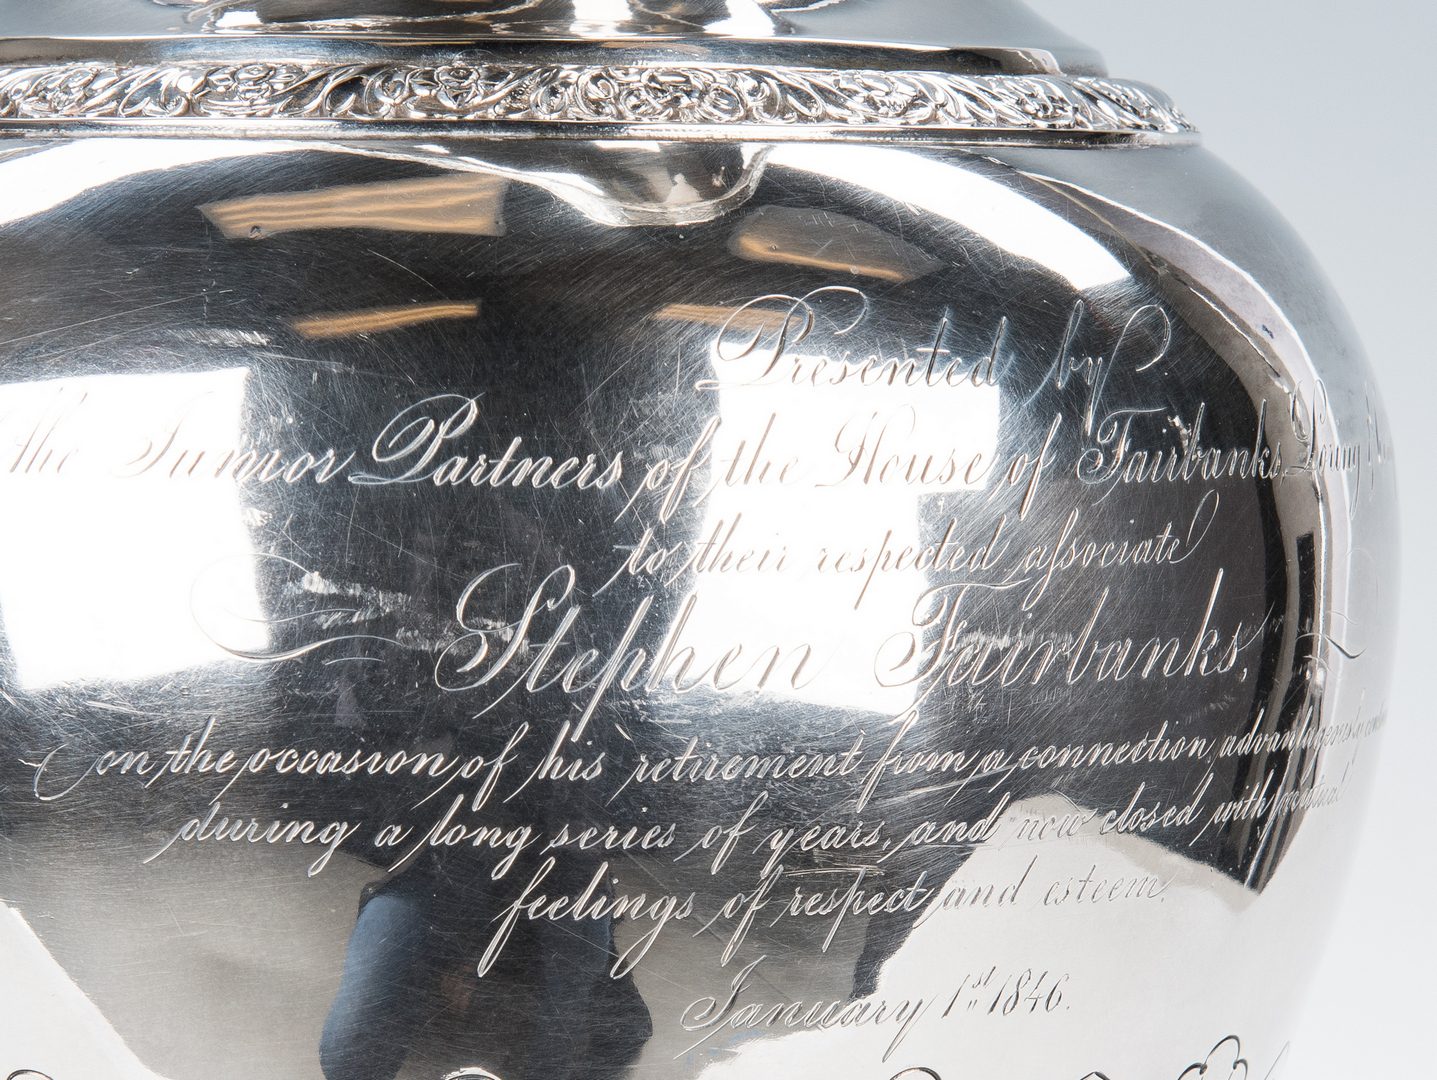 Lot 72: Coin Silver Presentation Pitcher